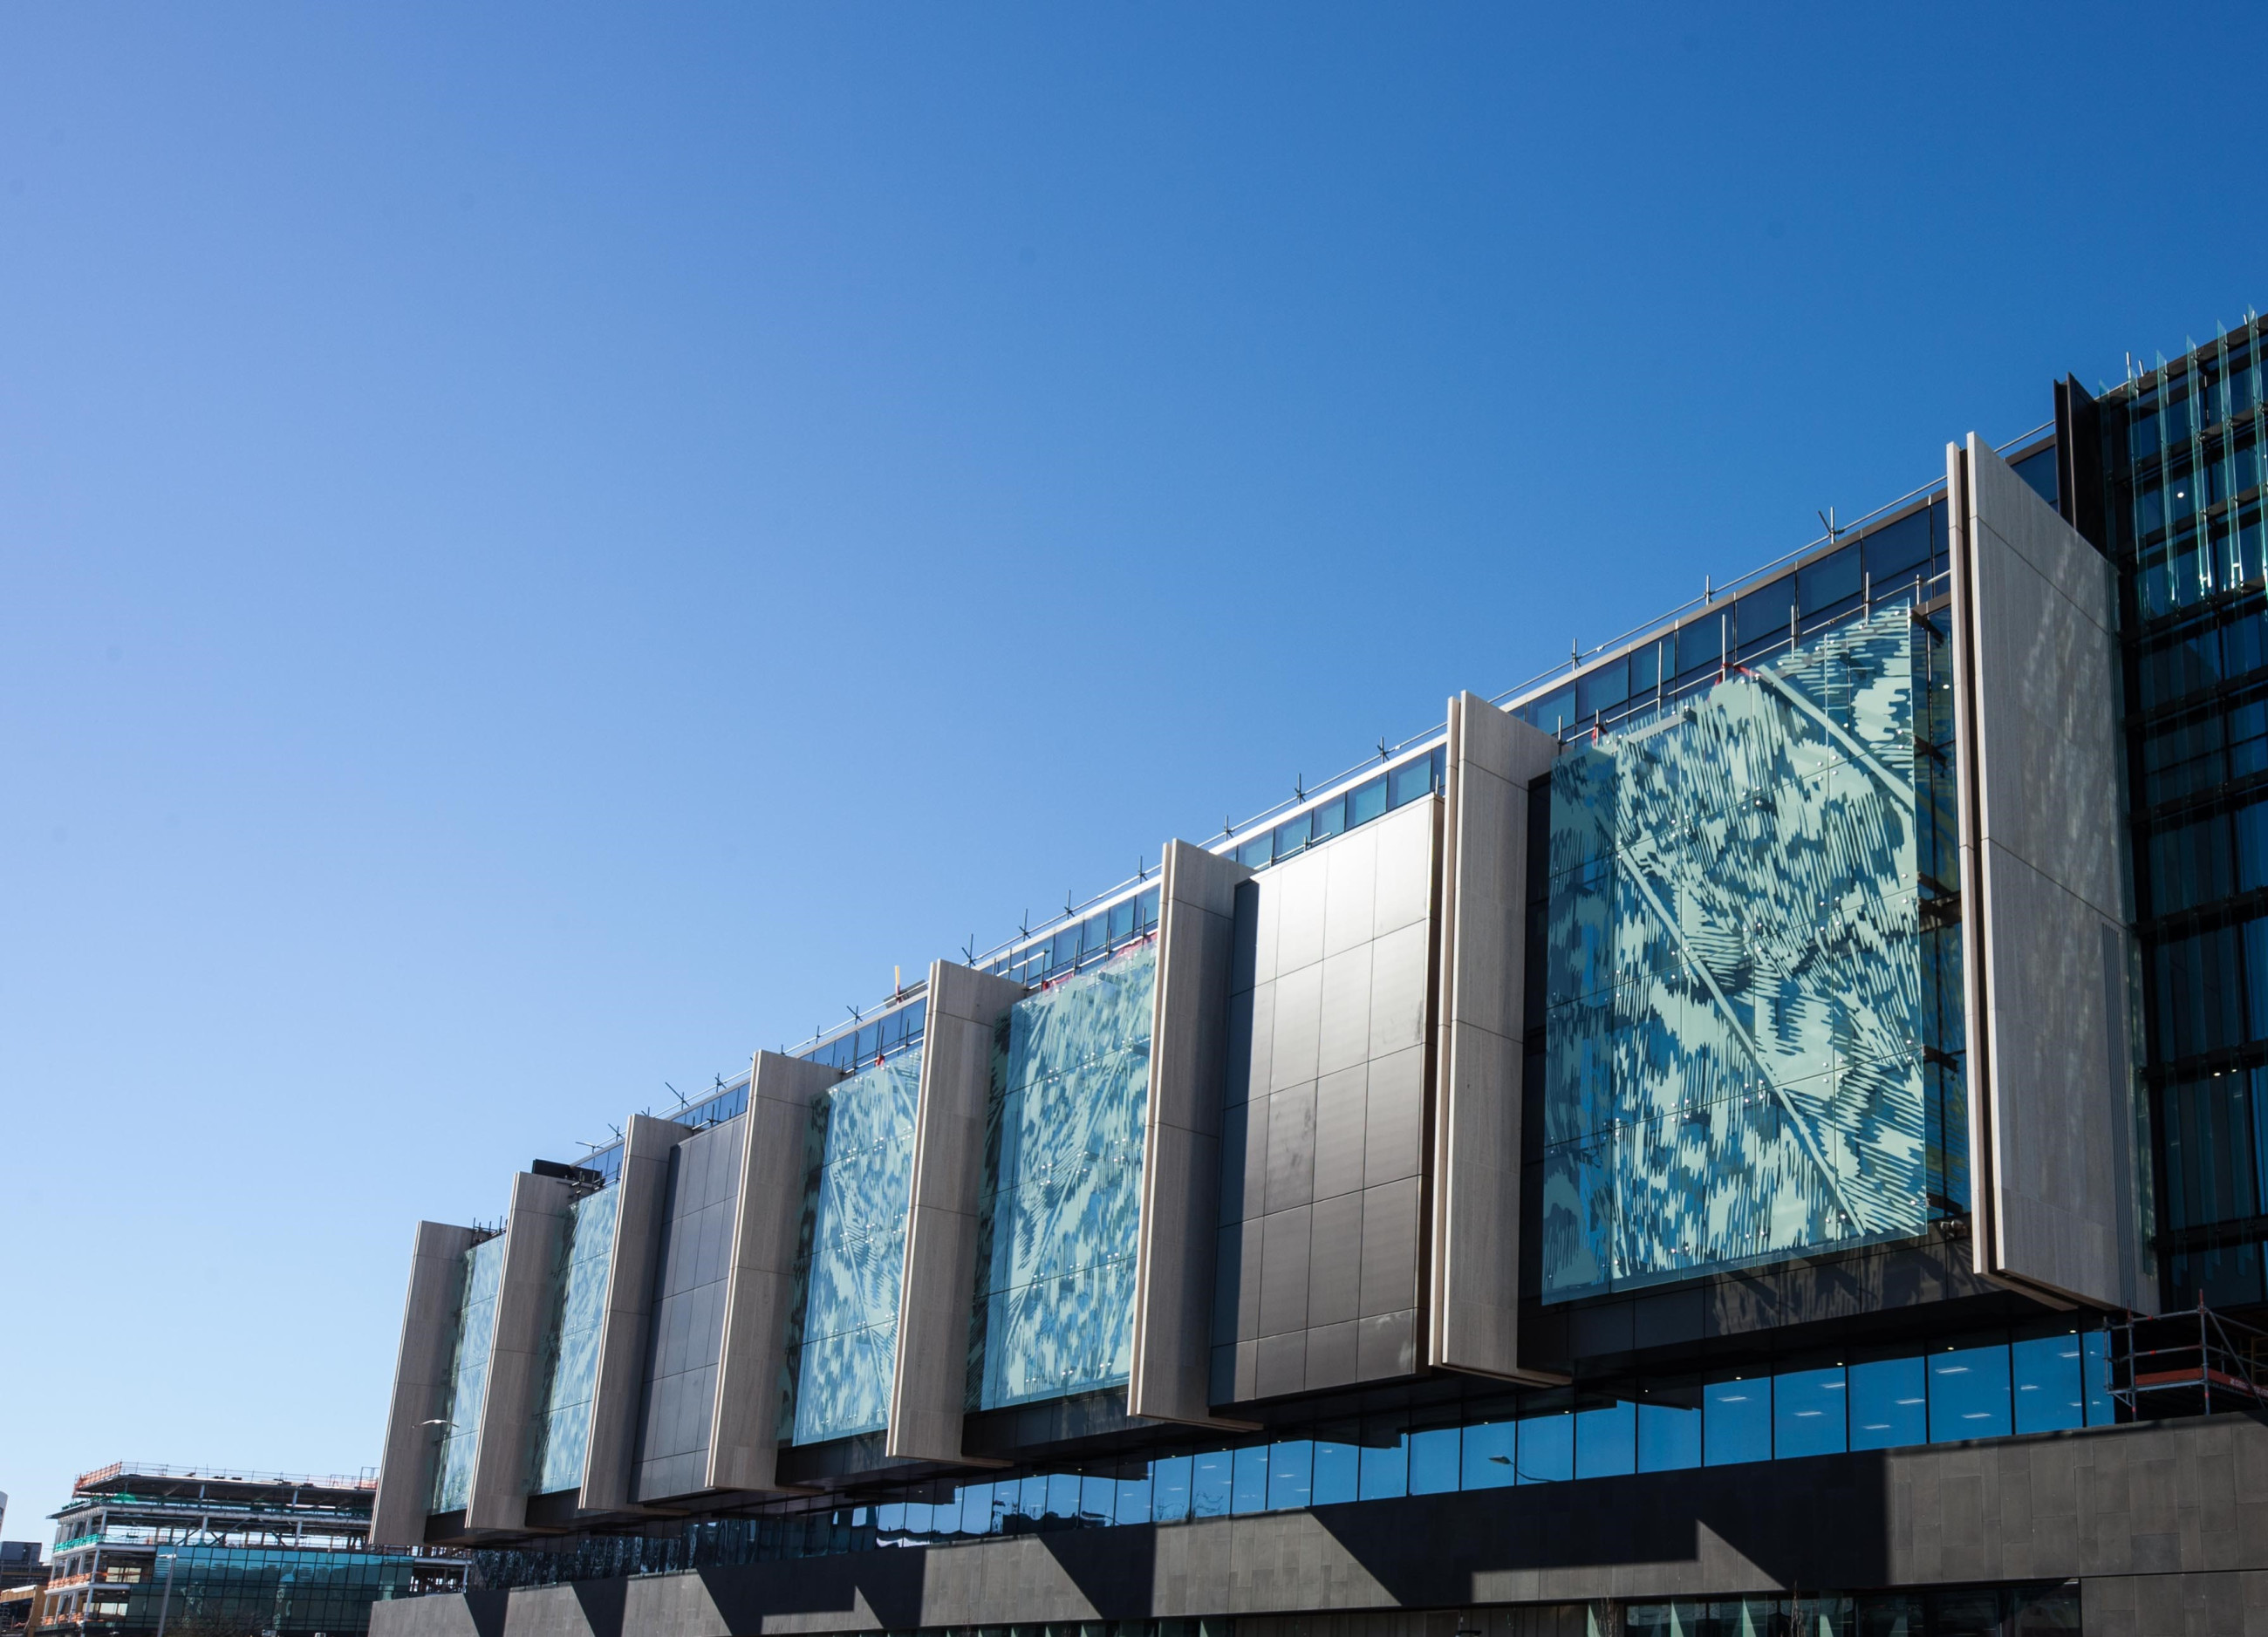 Glass panels with textured patterns for justice precinct